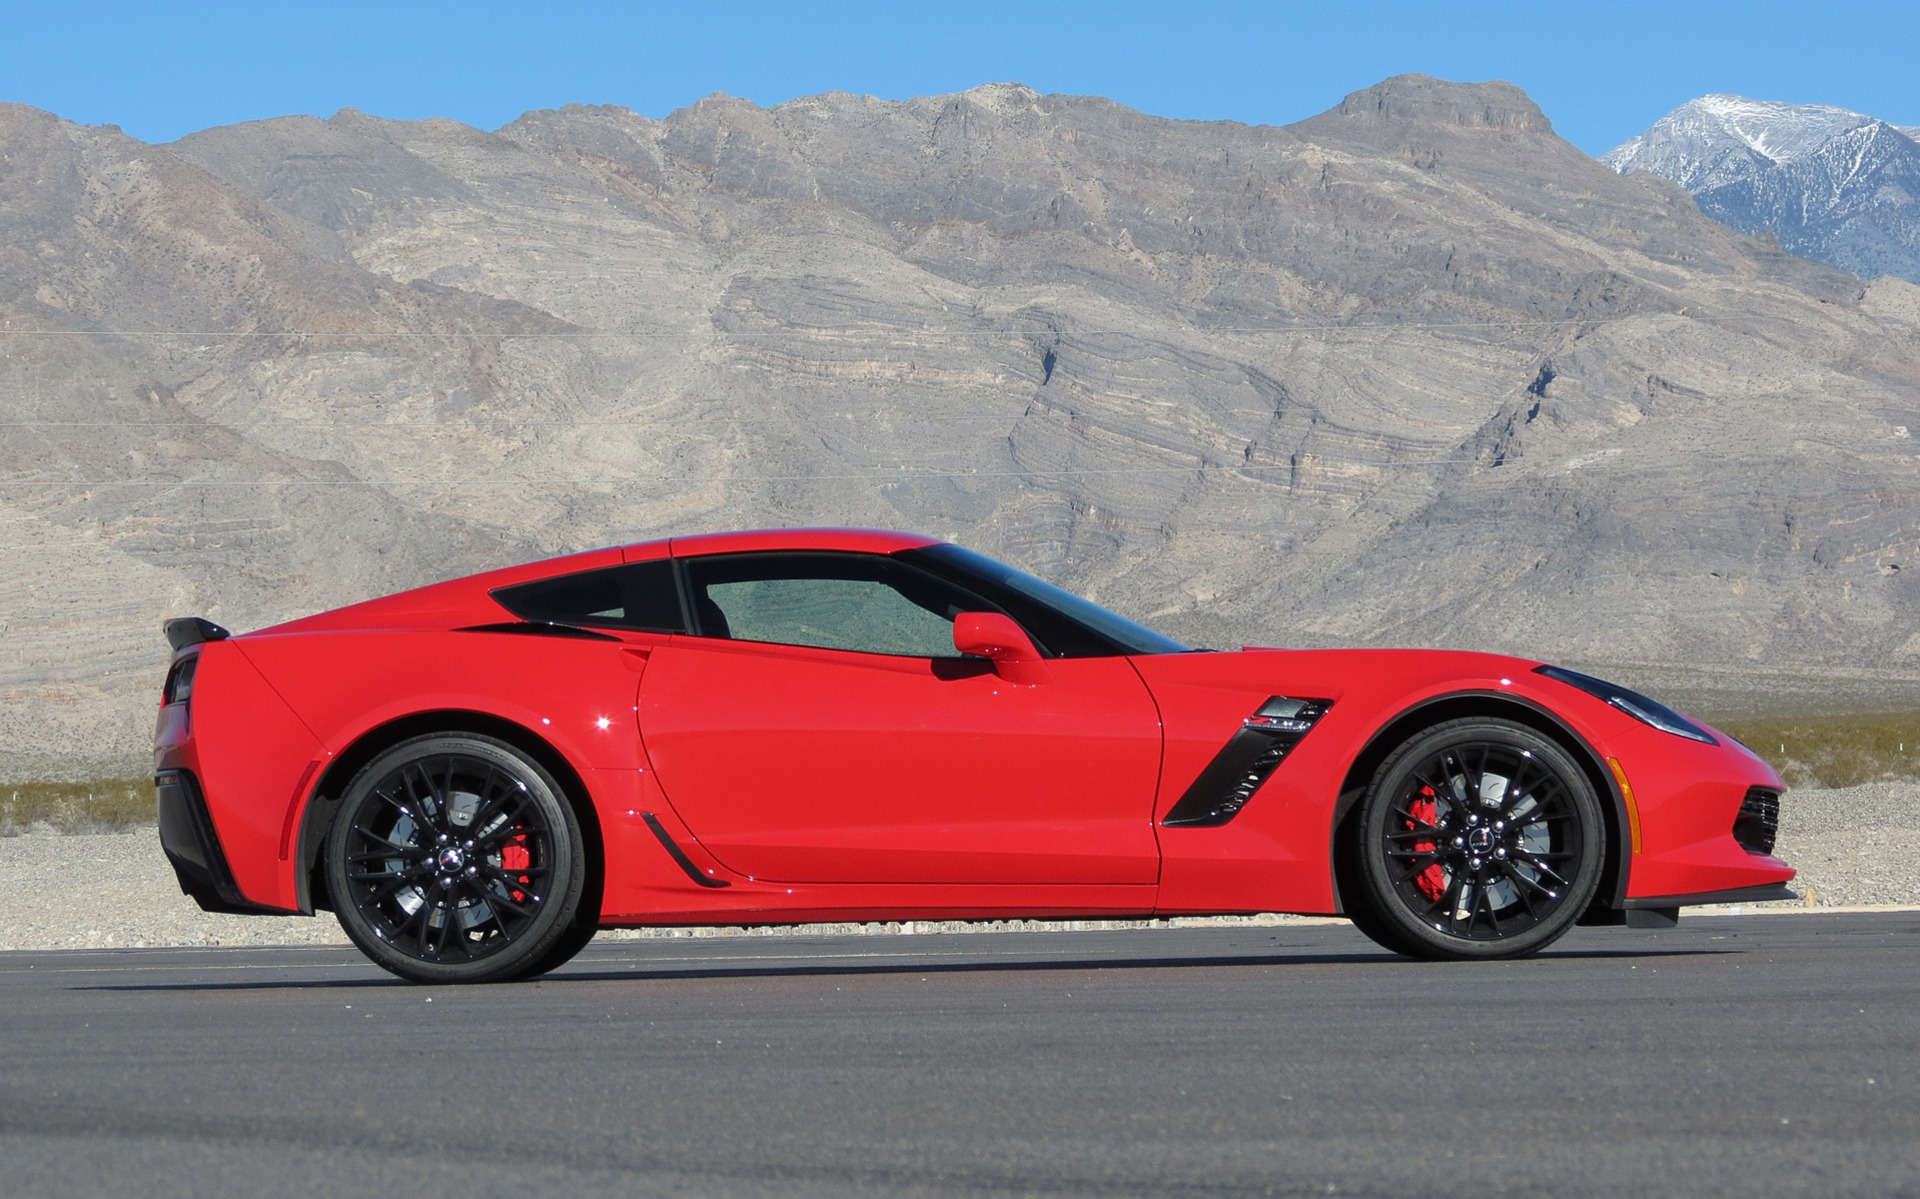 The Z07 option includes Brembo brakes with carbon ceramic discs.